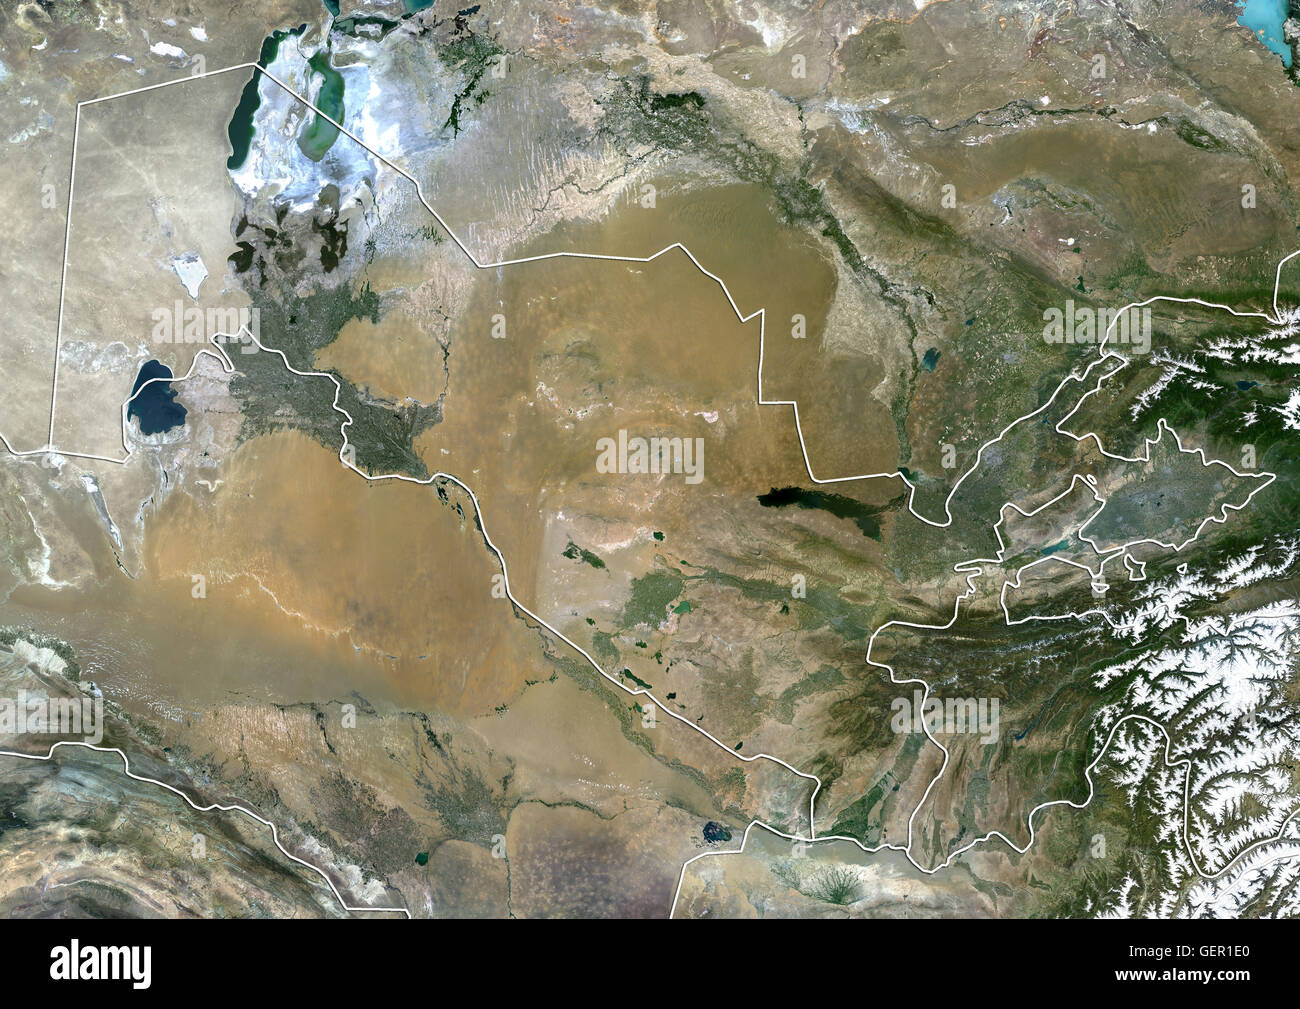 Satellite view of Uzbekistan (with country boundaries). This image was compiled from data acquired by Landsat 8 satellite in 2014. Stock Photo